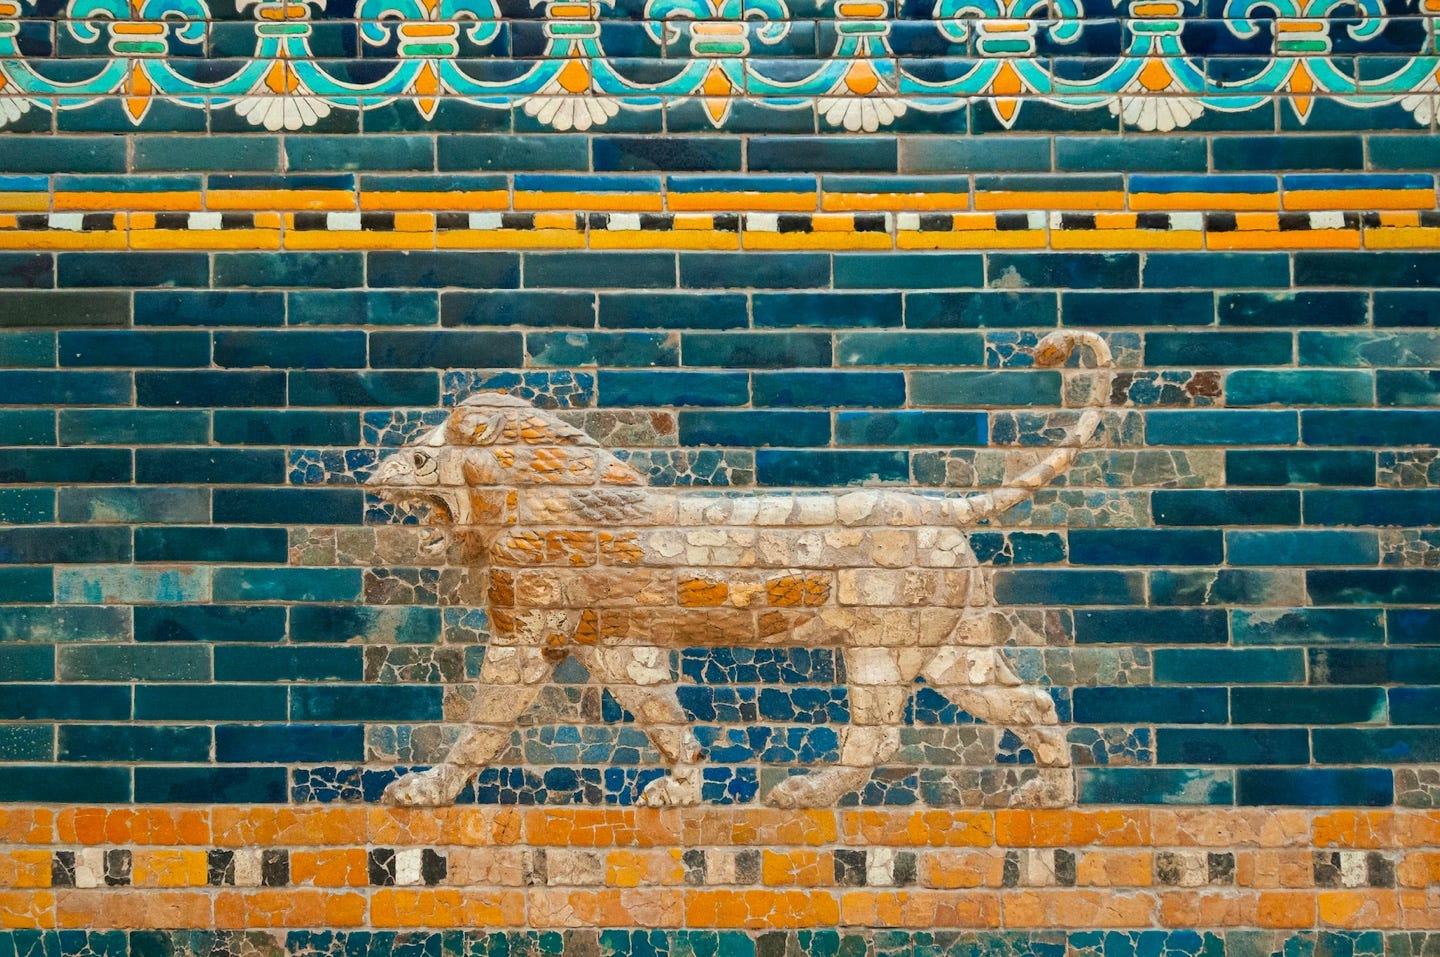 Detail of a section of the Ishtar Gate, it is a relief of a gold lion on a blue background, all made in shining bricks.